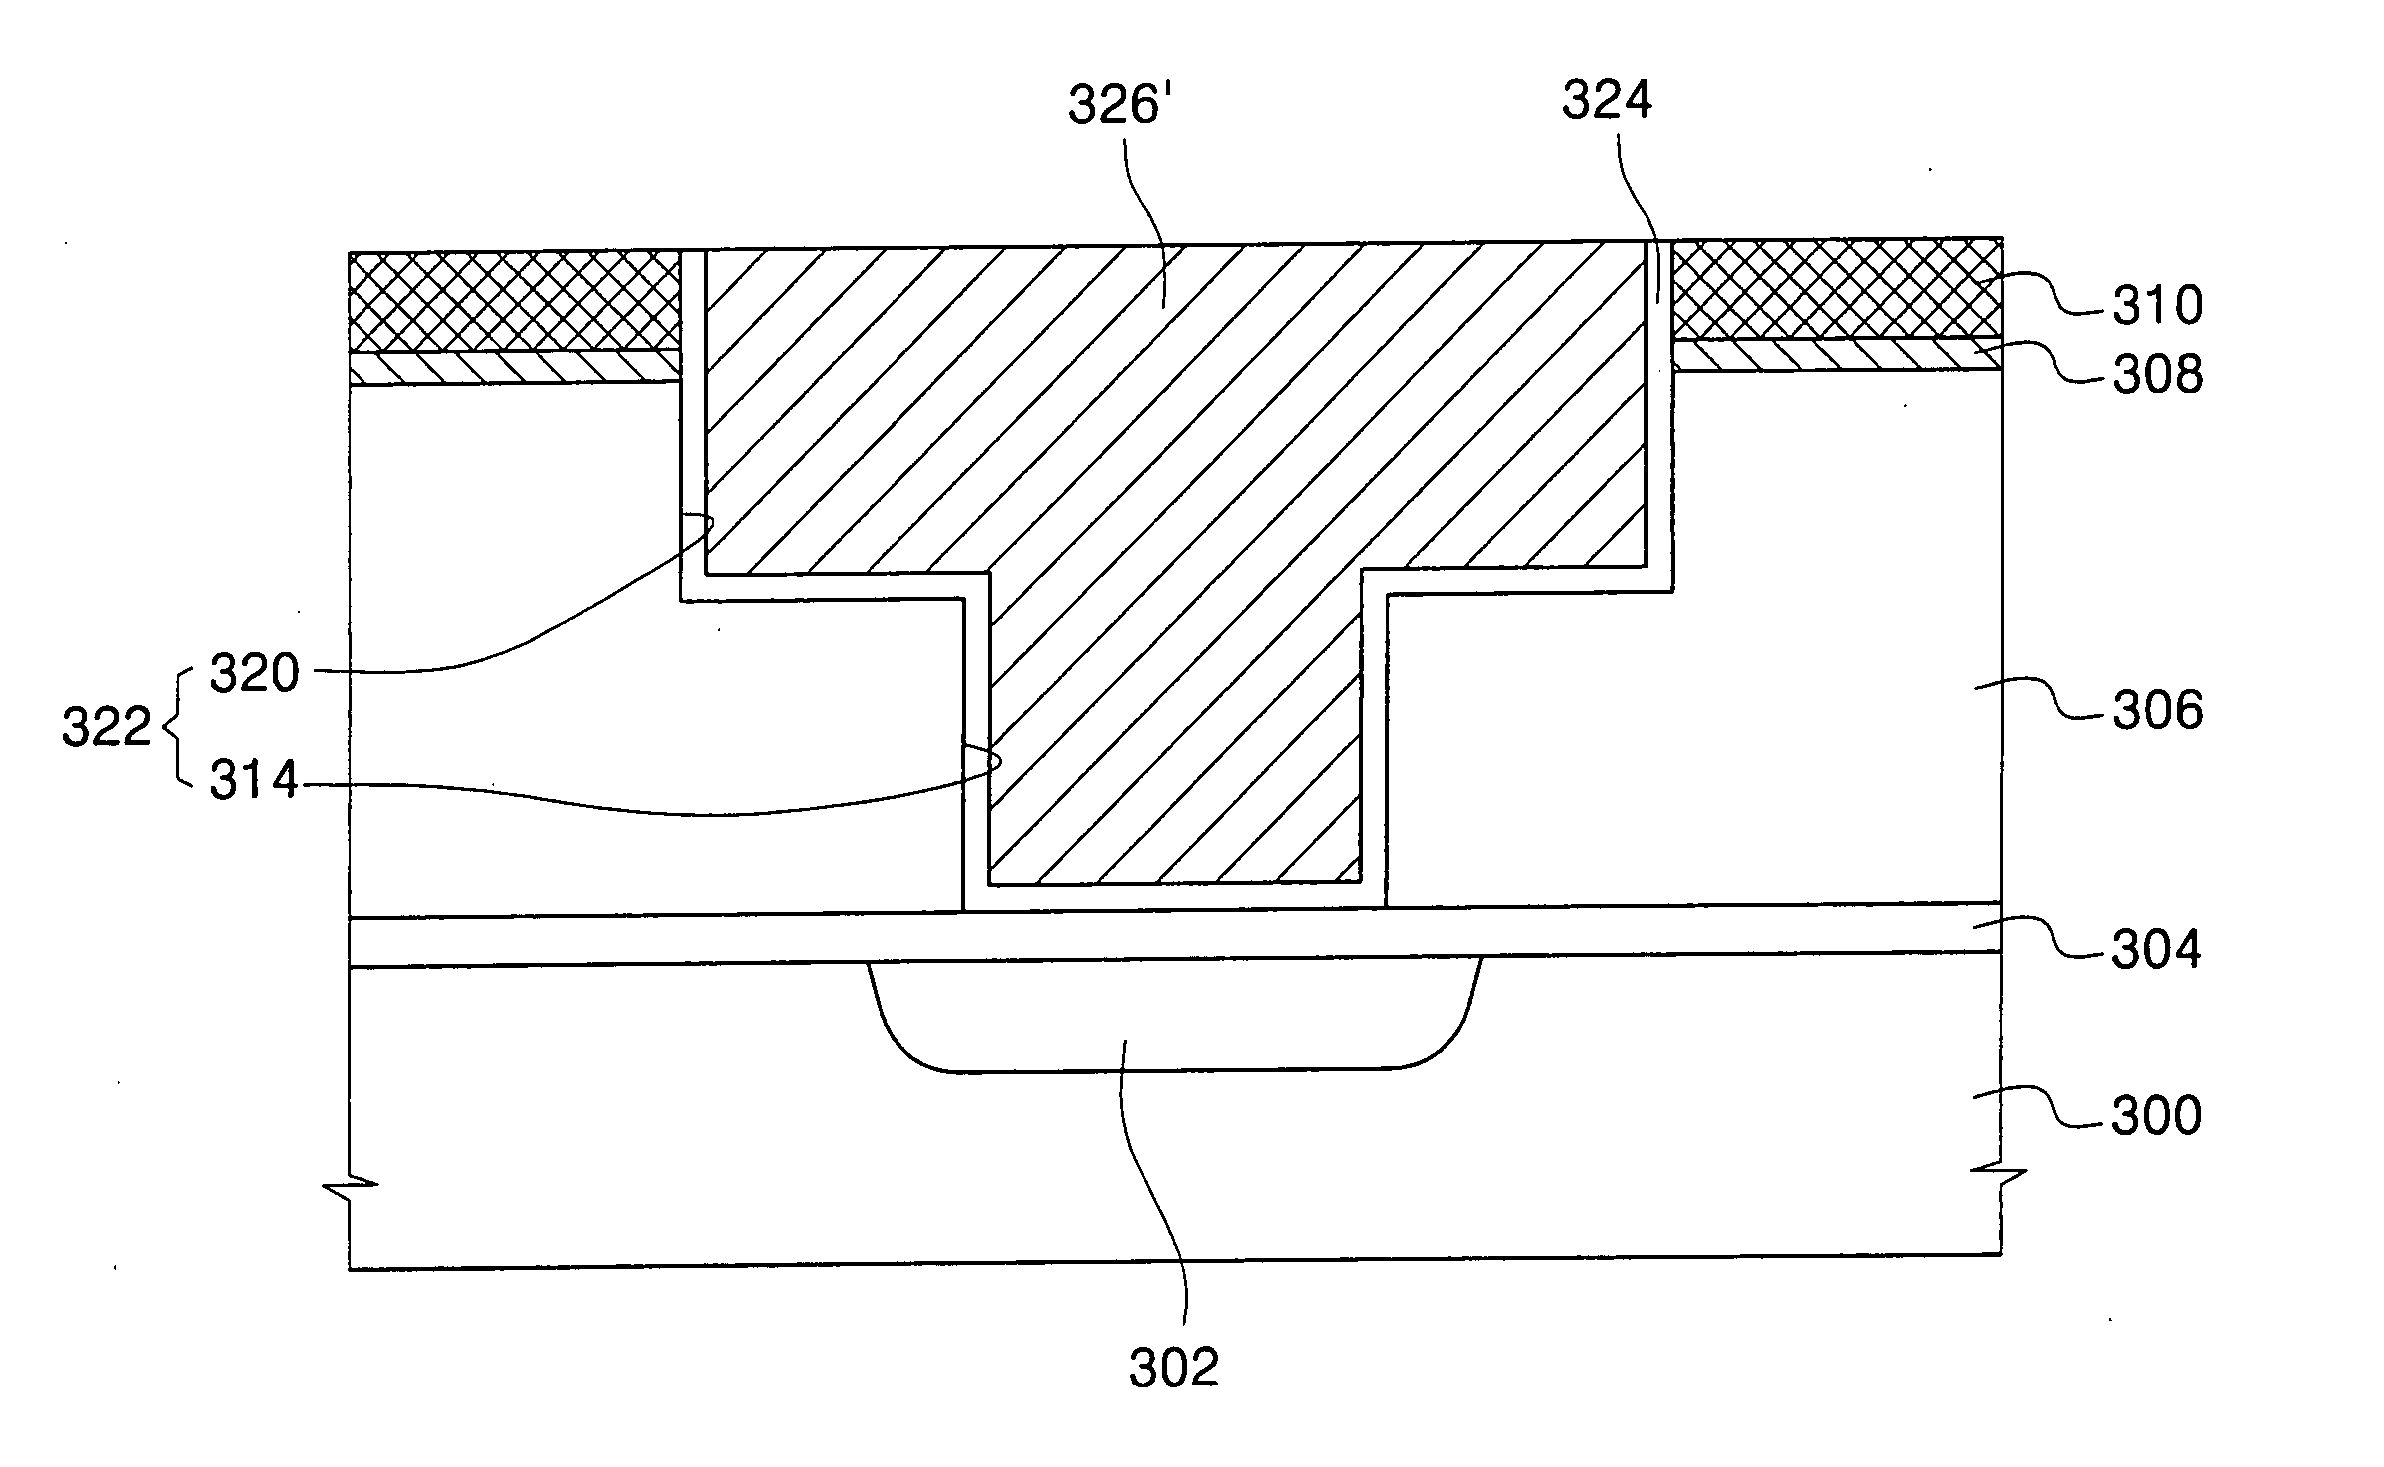 Method for forming interconnection line in semiconductor device and interconnection line structure